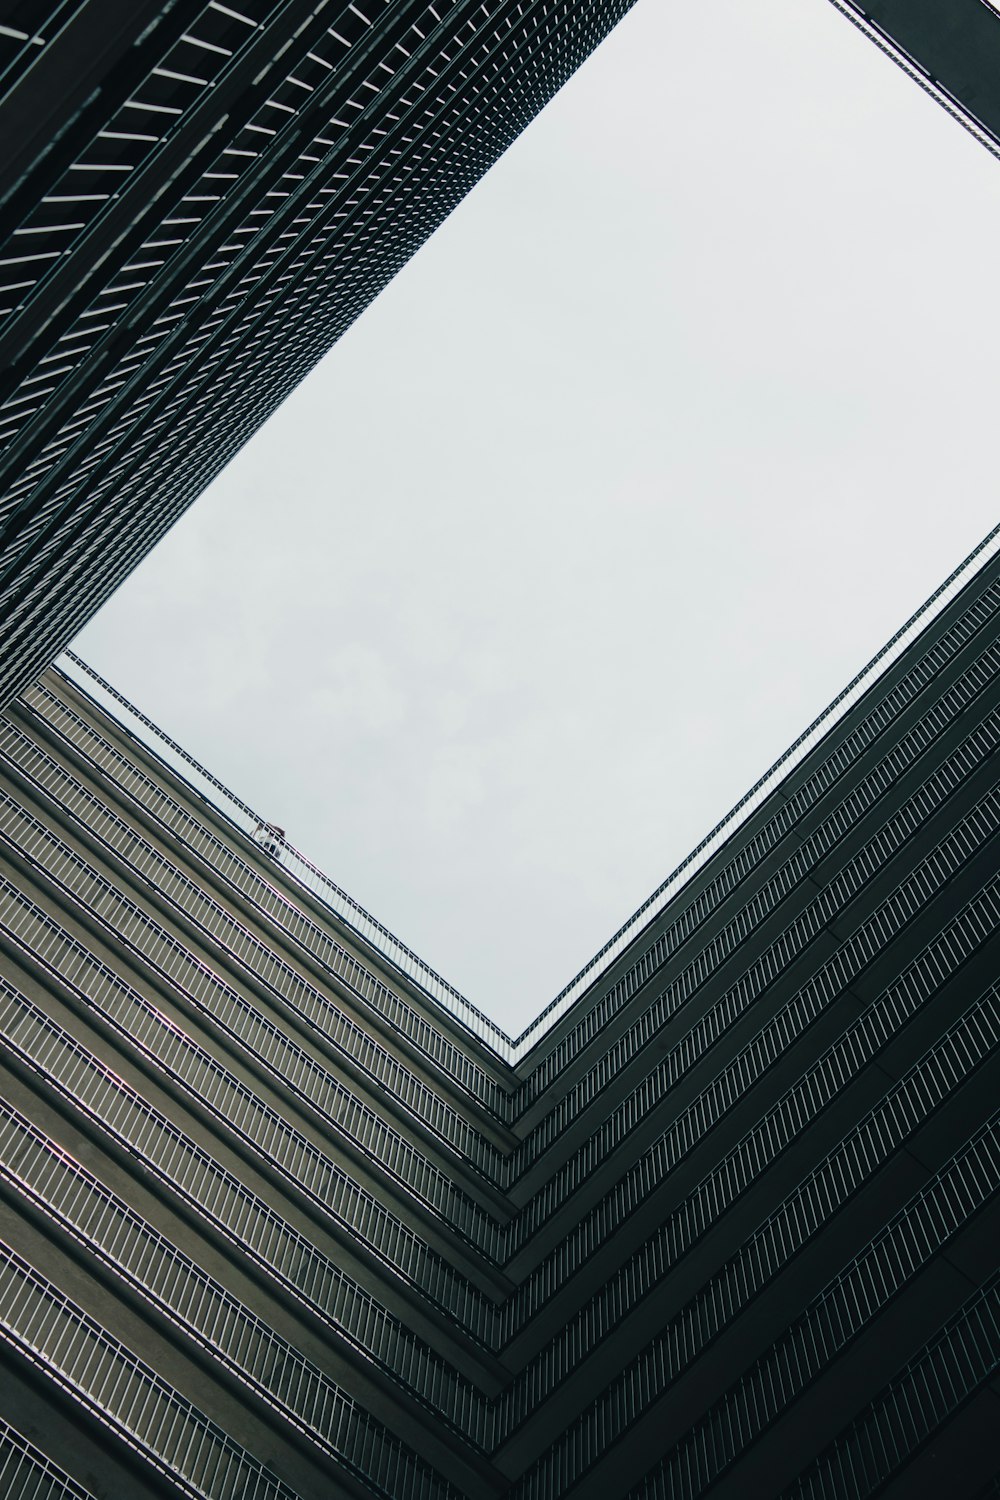 worms eye view of gray concrete building during daytime